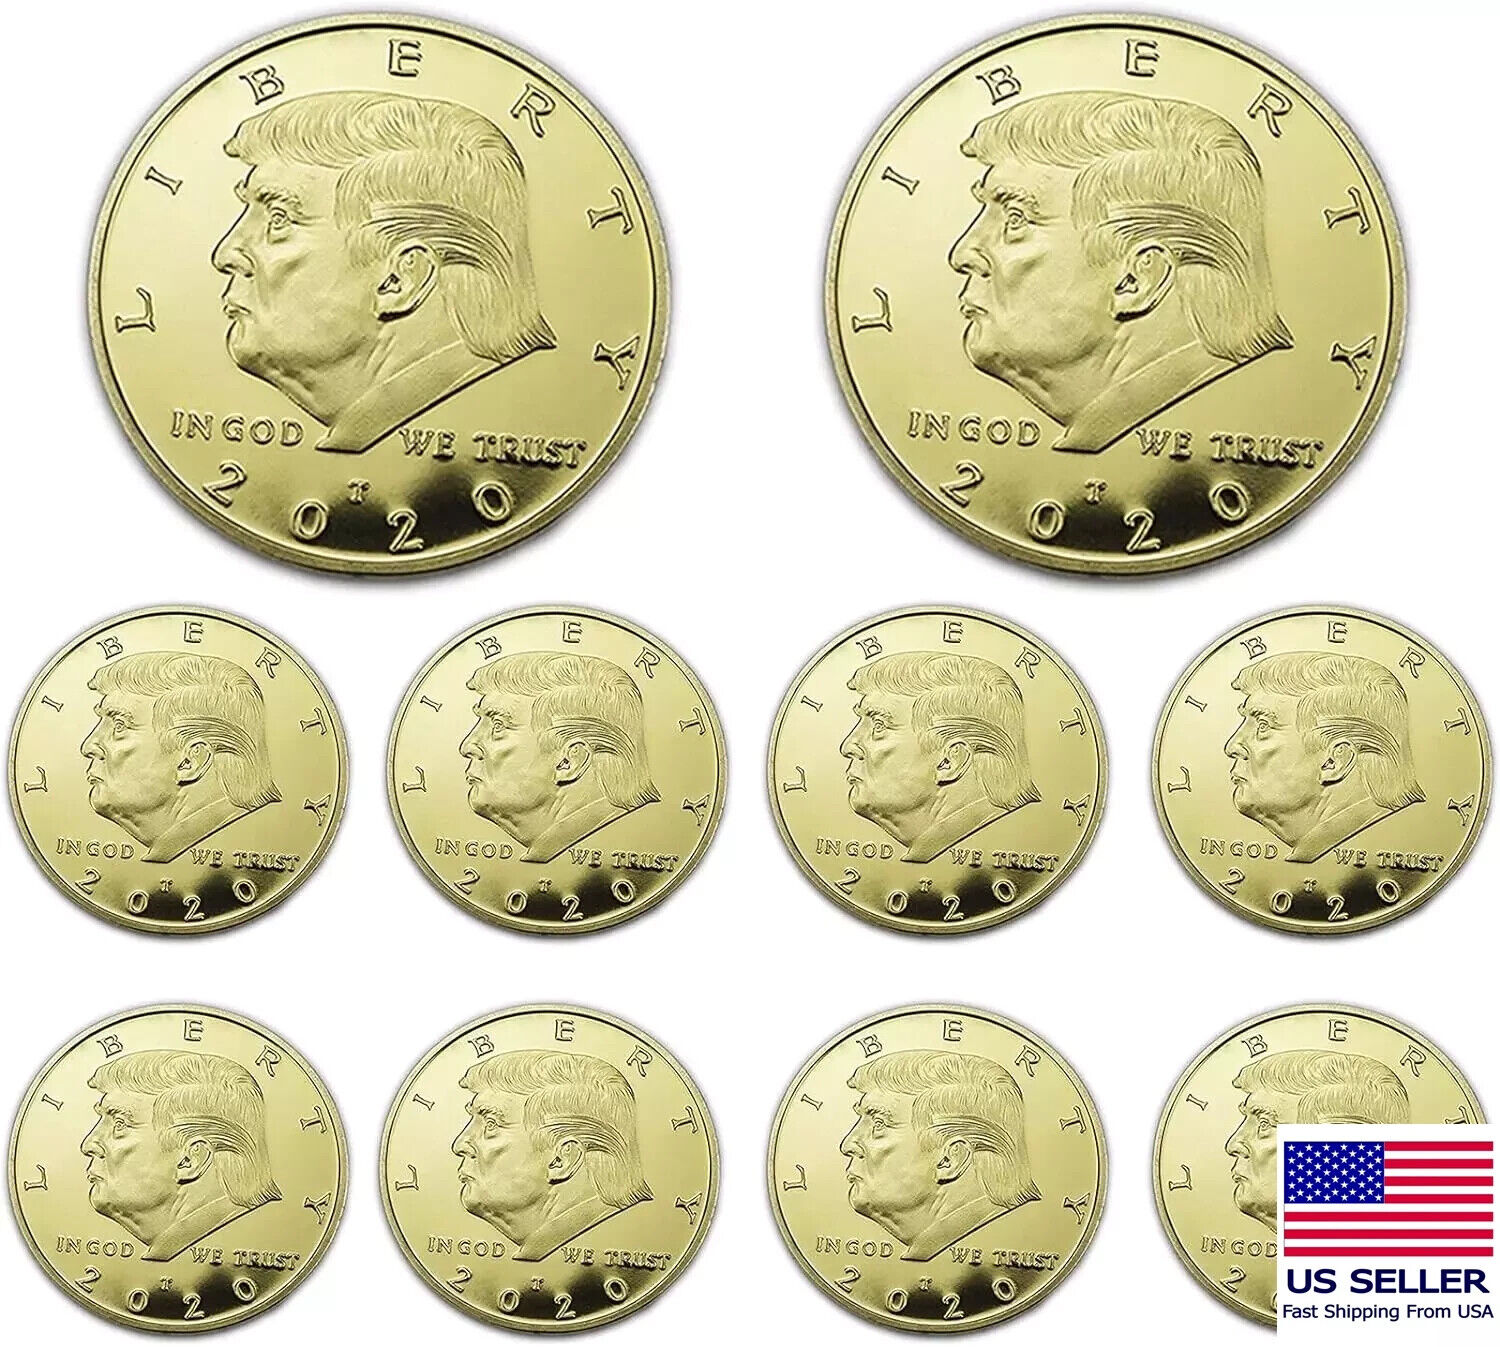 10 Pack 2020 Donald Trump Gold Plated Coins with Stands, President Eagle Seal Co